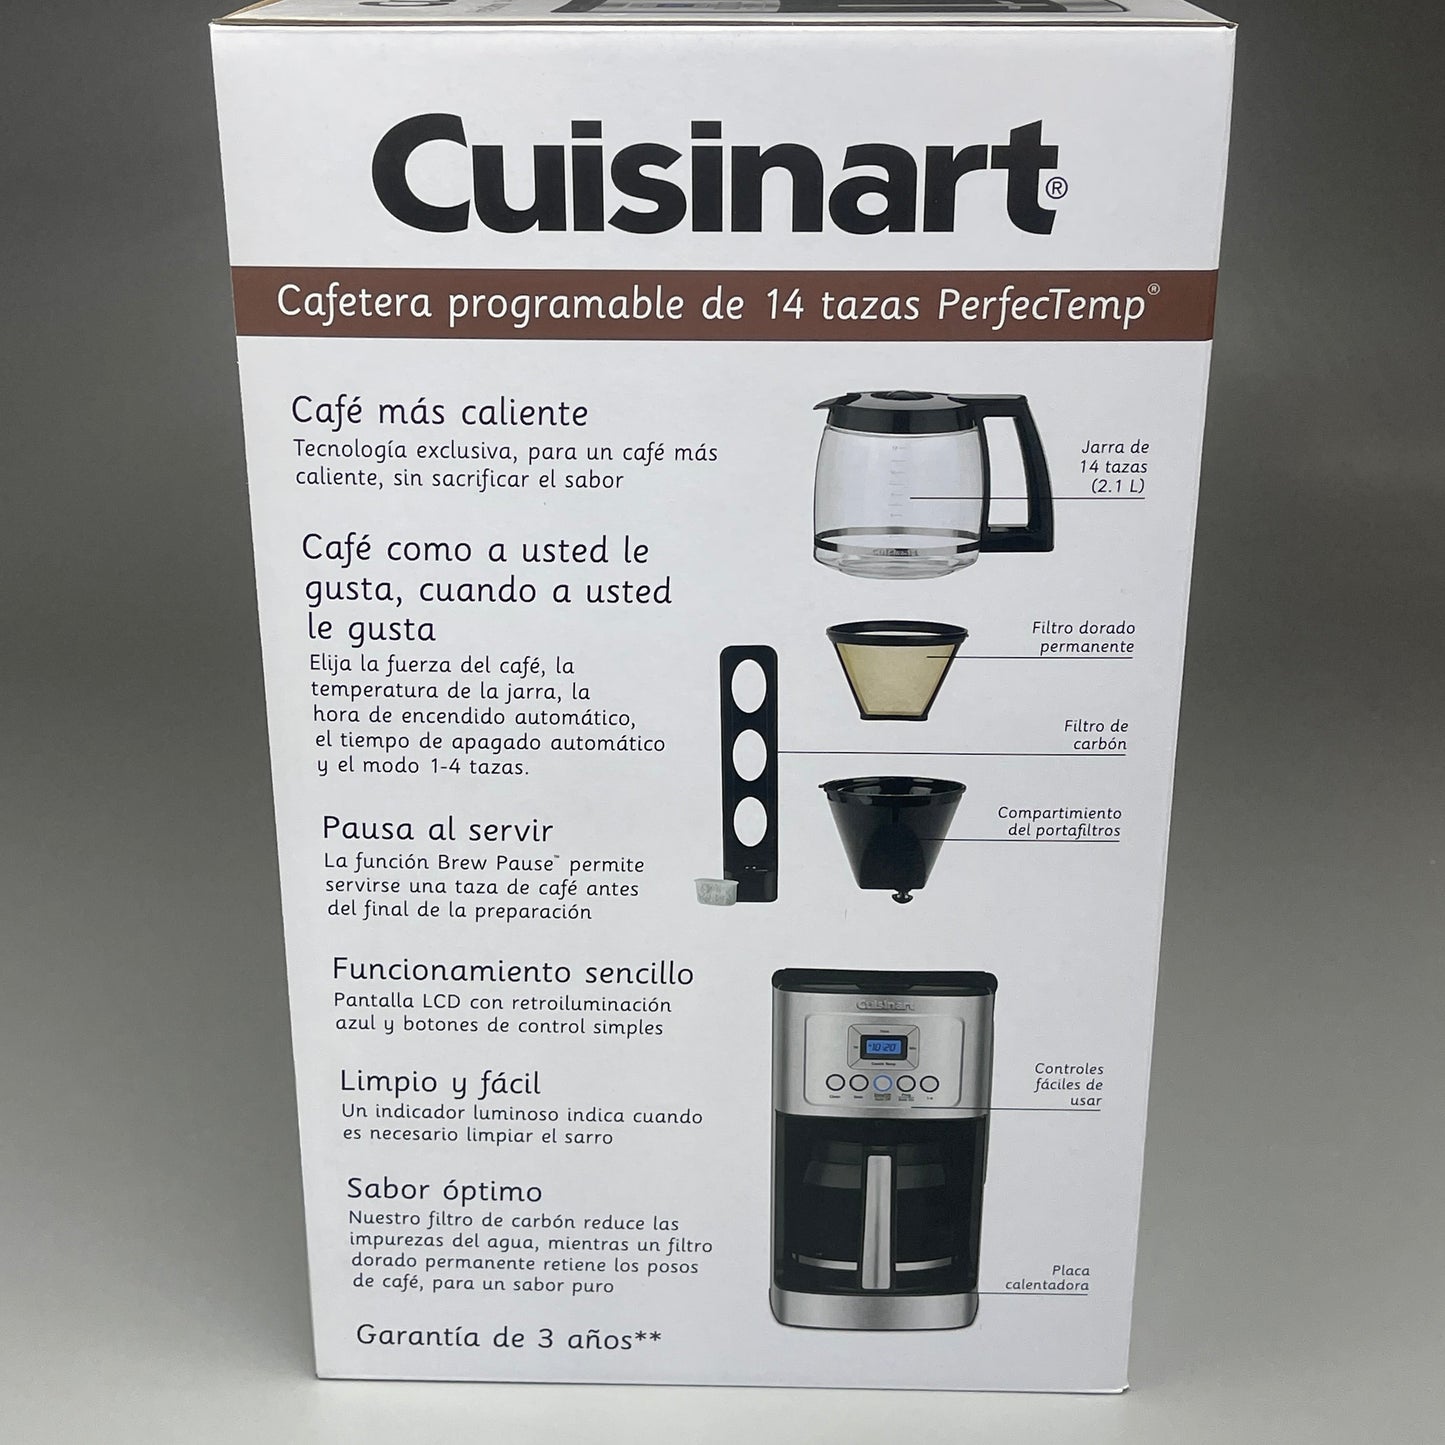 CUISINART (14 CUP) Programmable Coffee Maker Stainless Steel DCC-3200P1